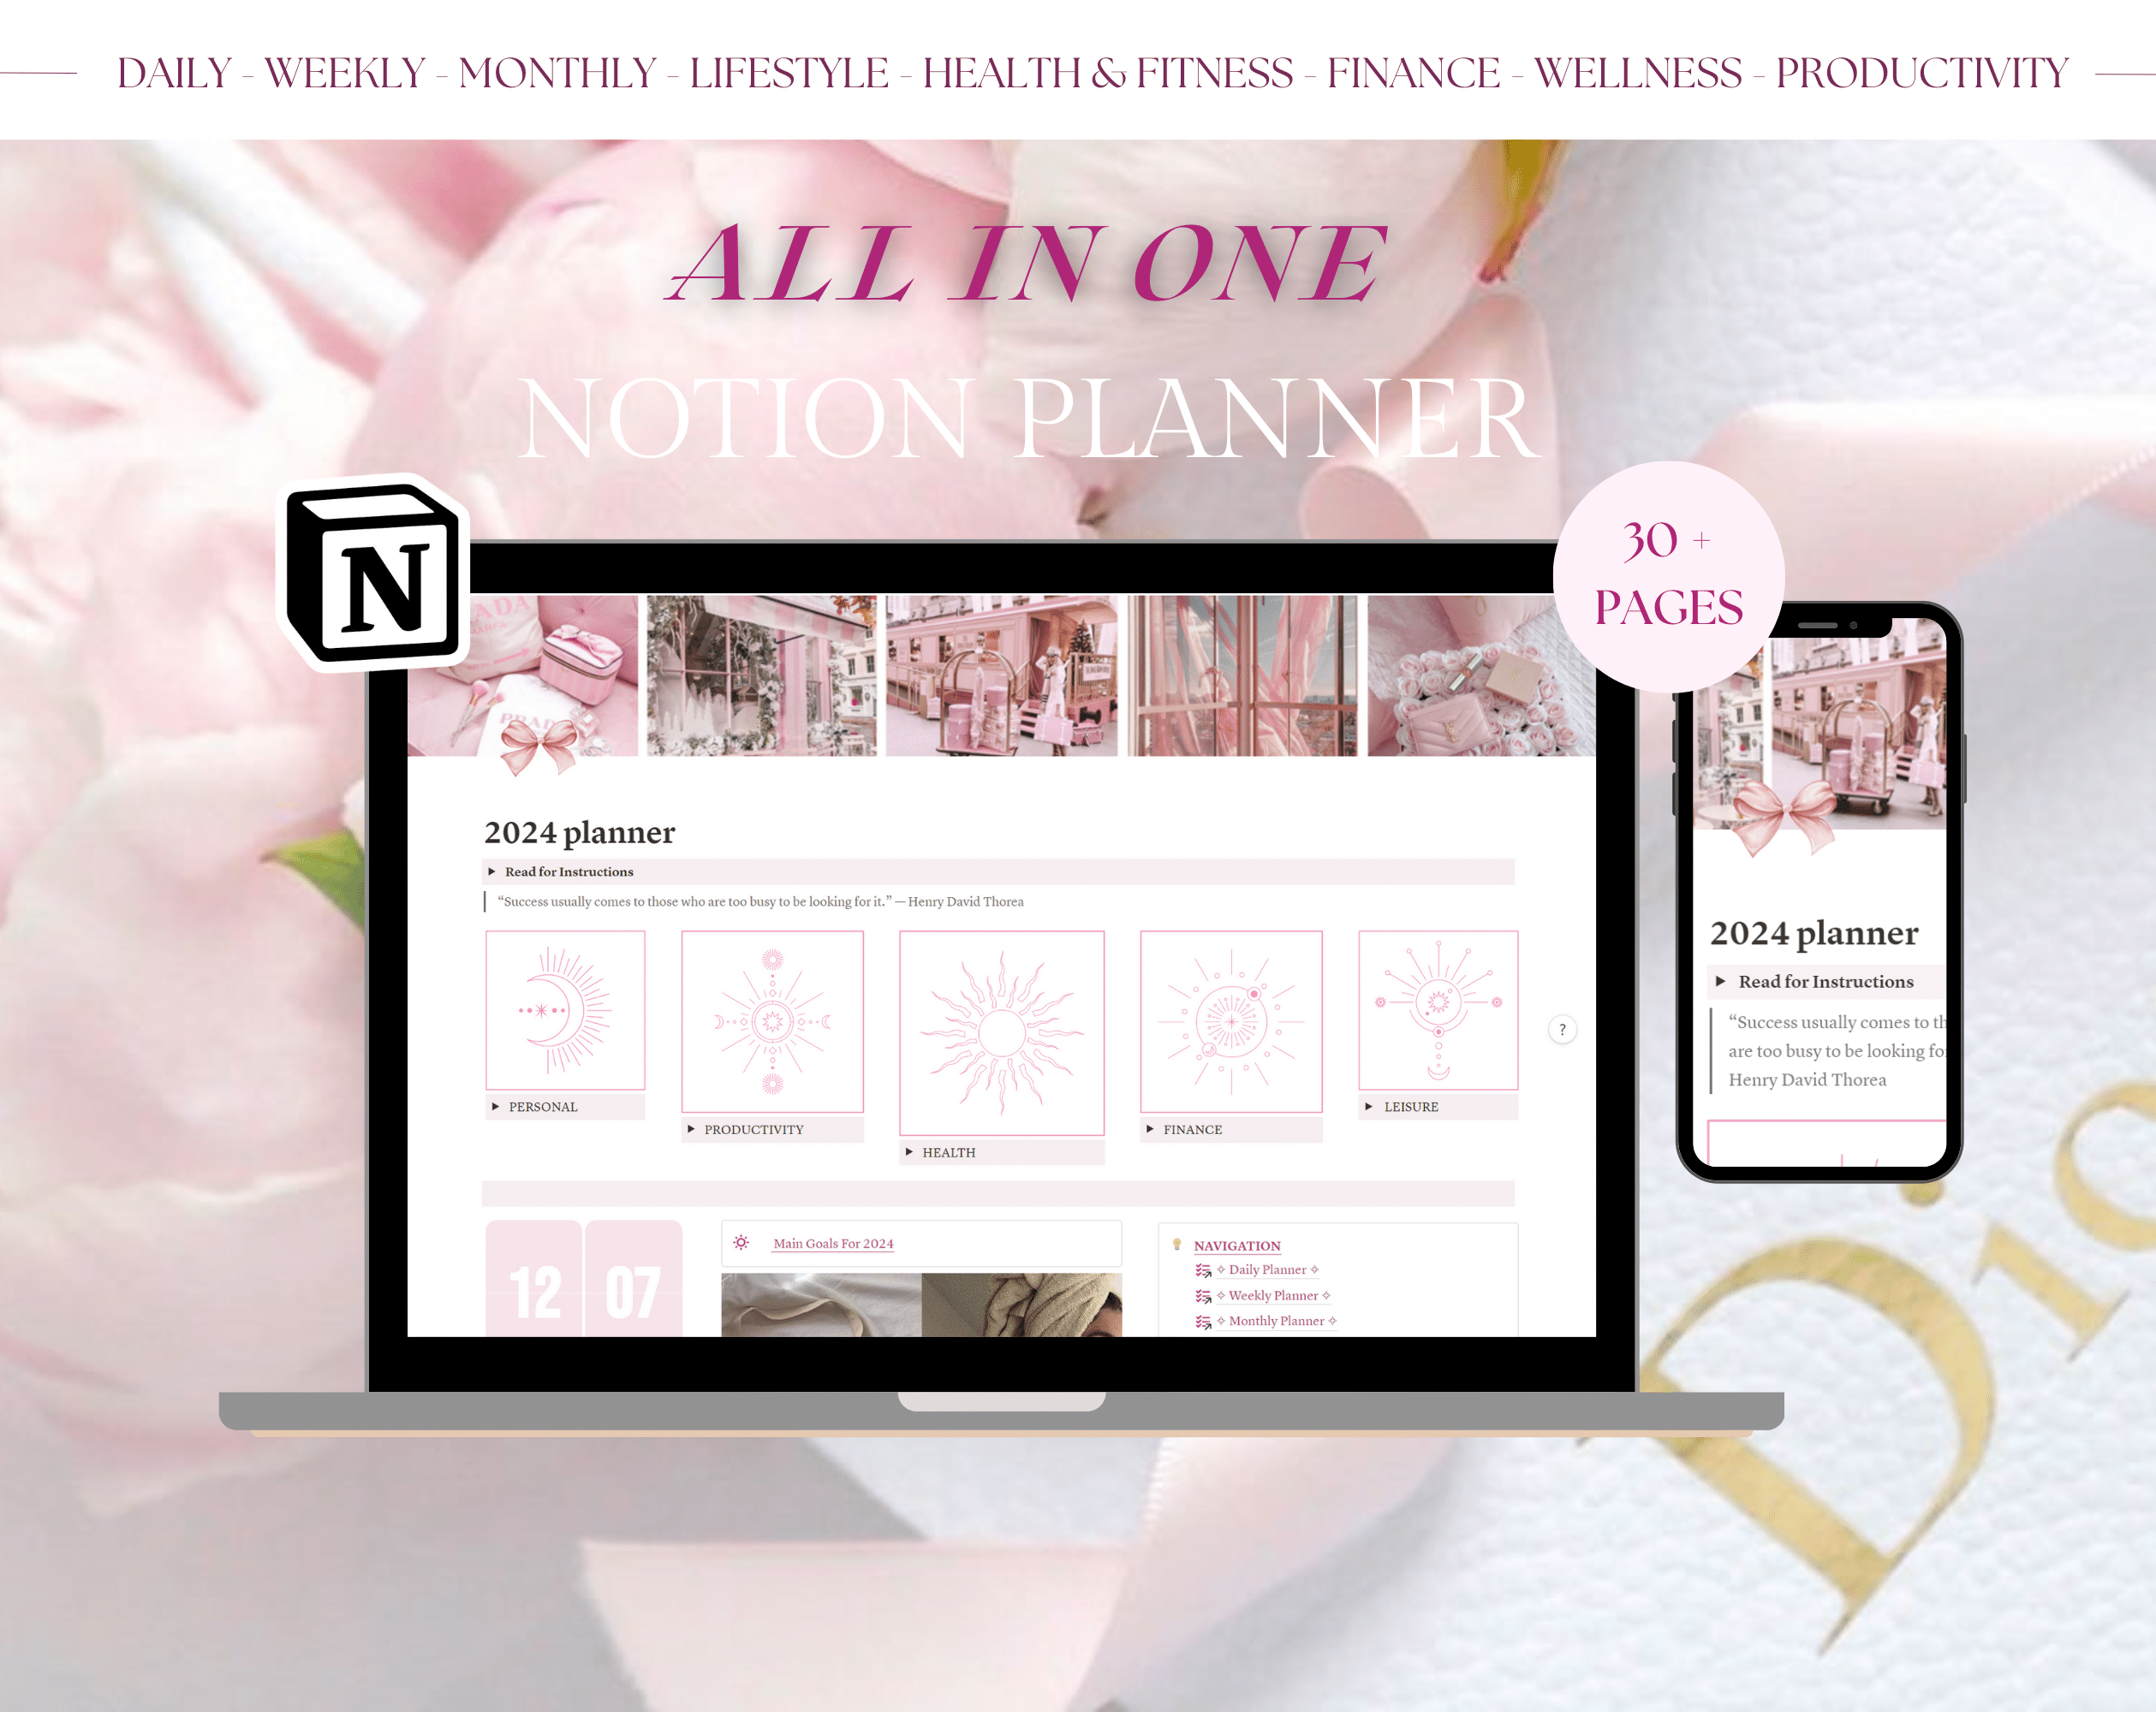 Introducing Girly Pink Notion planner - where aesthetic design meets functionality! Whether you're setting goals, tracking your lifestyle, or just staying organized, this planner has you covered. Access and personalize effortlessly across devices to keep your life on track.